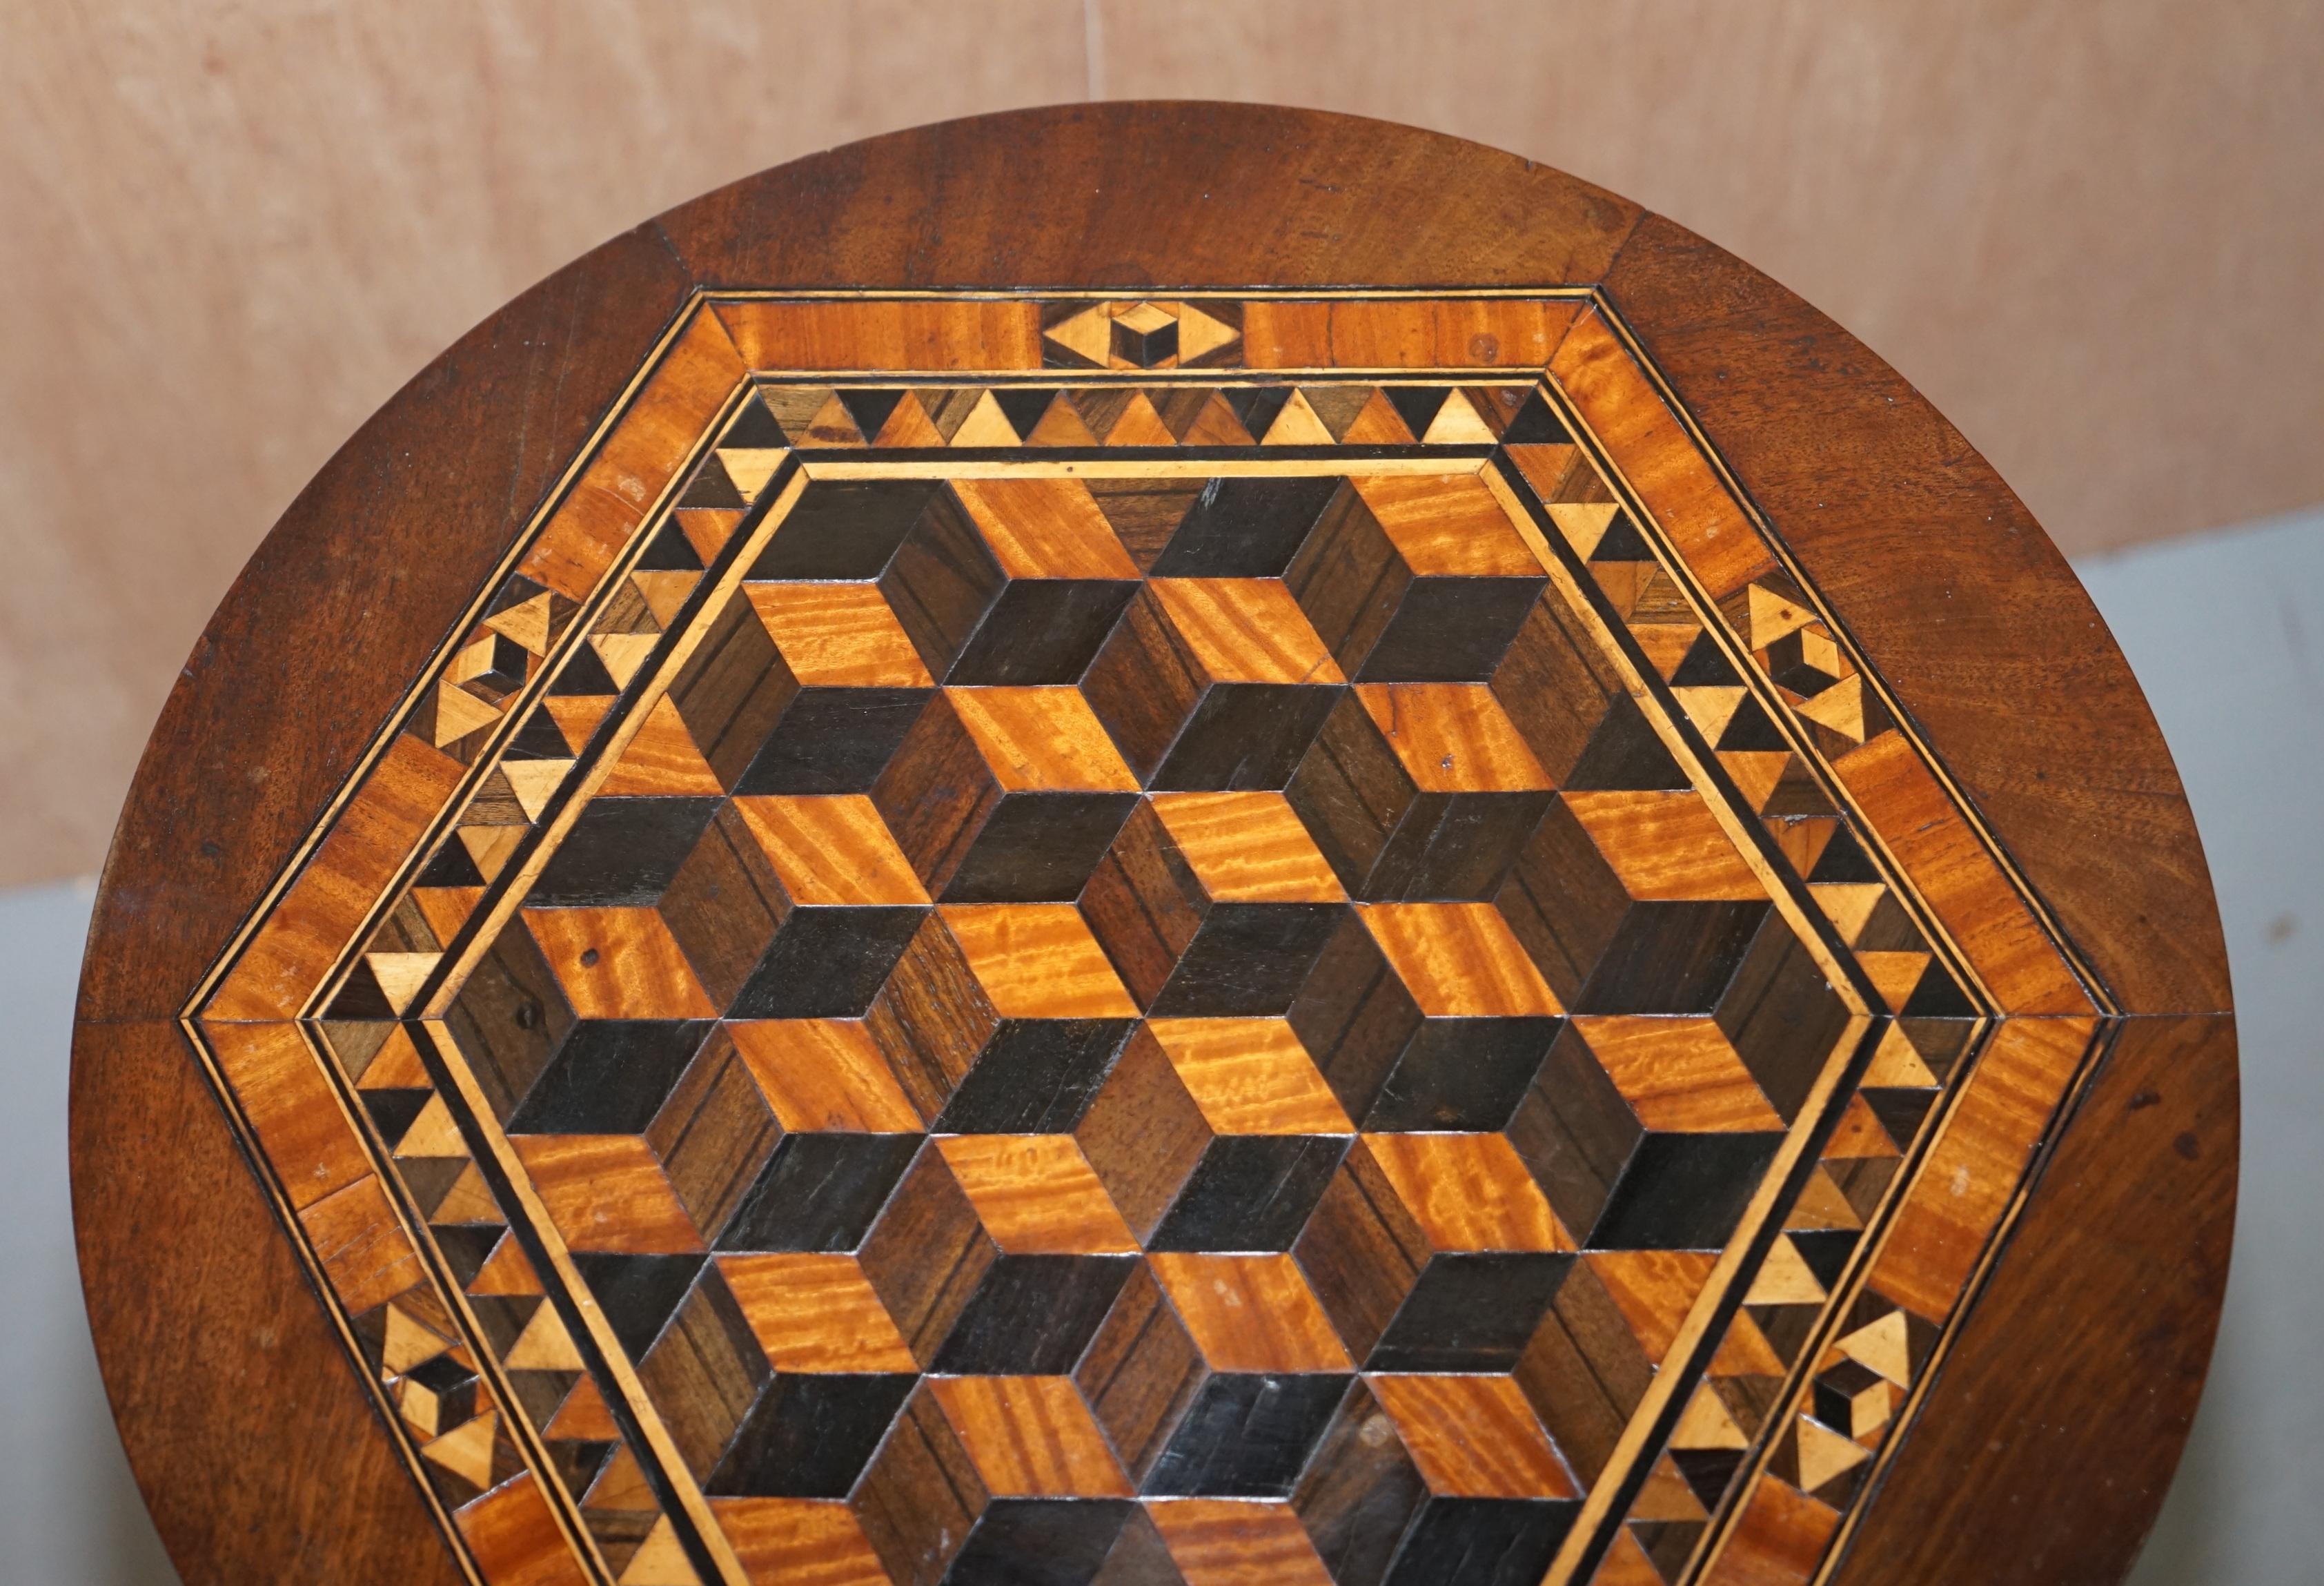 English Rare Victorian Hardwood Occasional Table, Geometric Parquetry Inlaid Wood Top For Sale